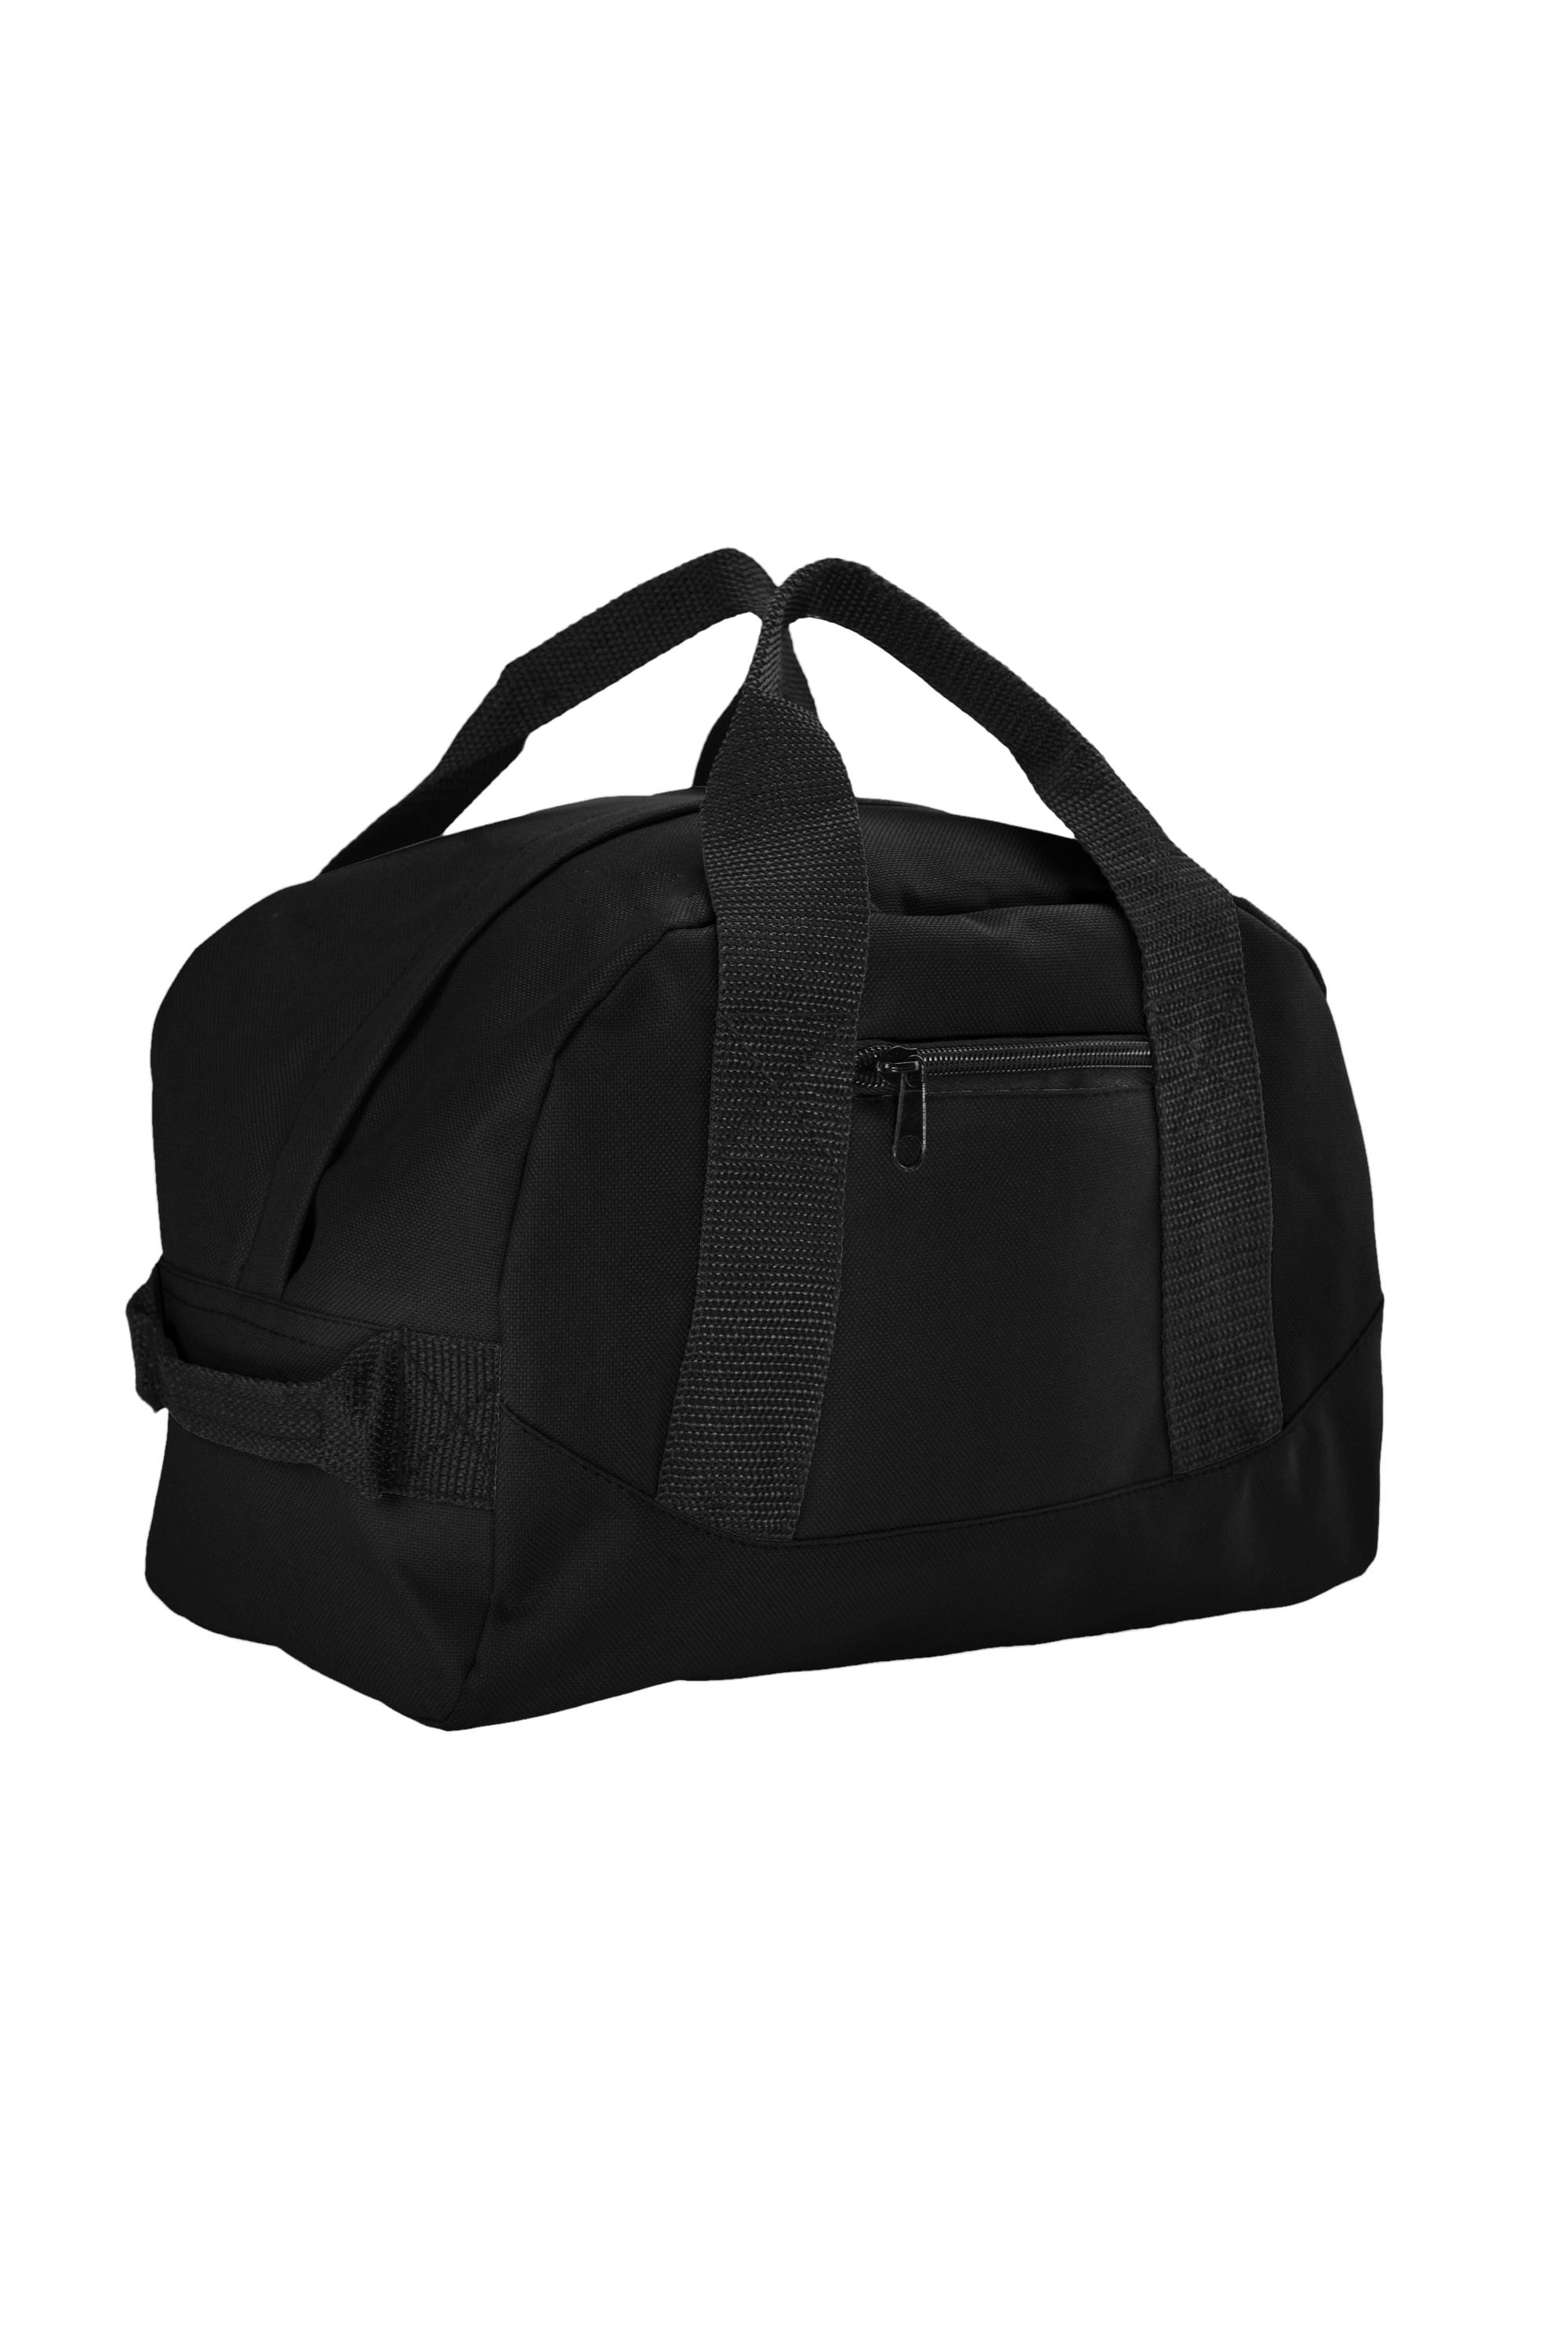 Chase Small Duffel  Travel Bag by President Bags  GottaGoin